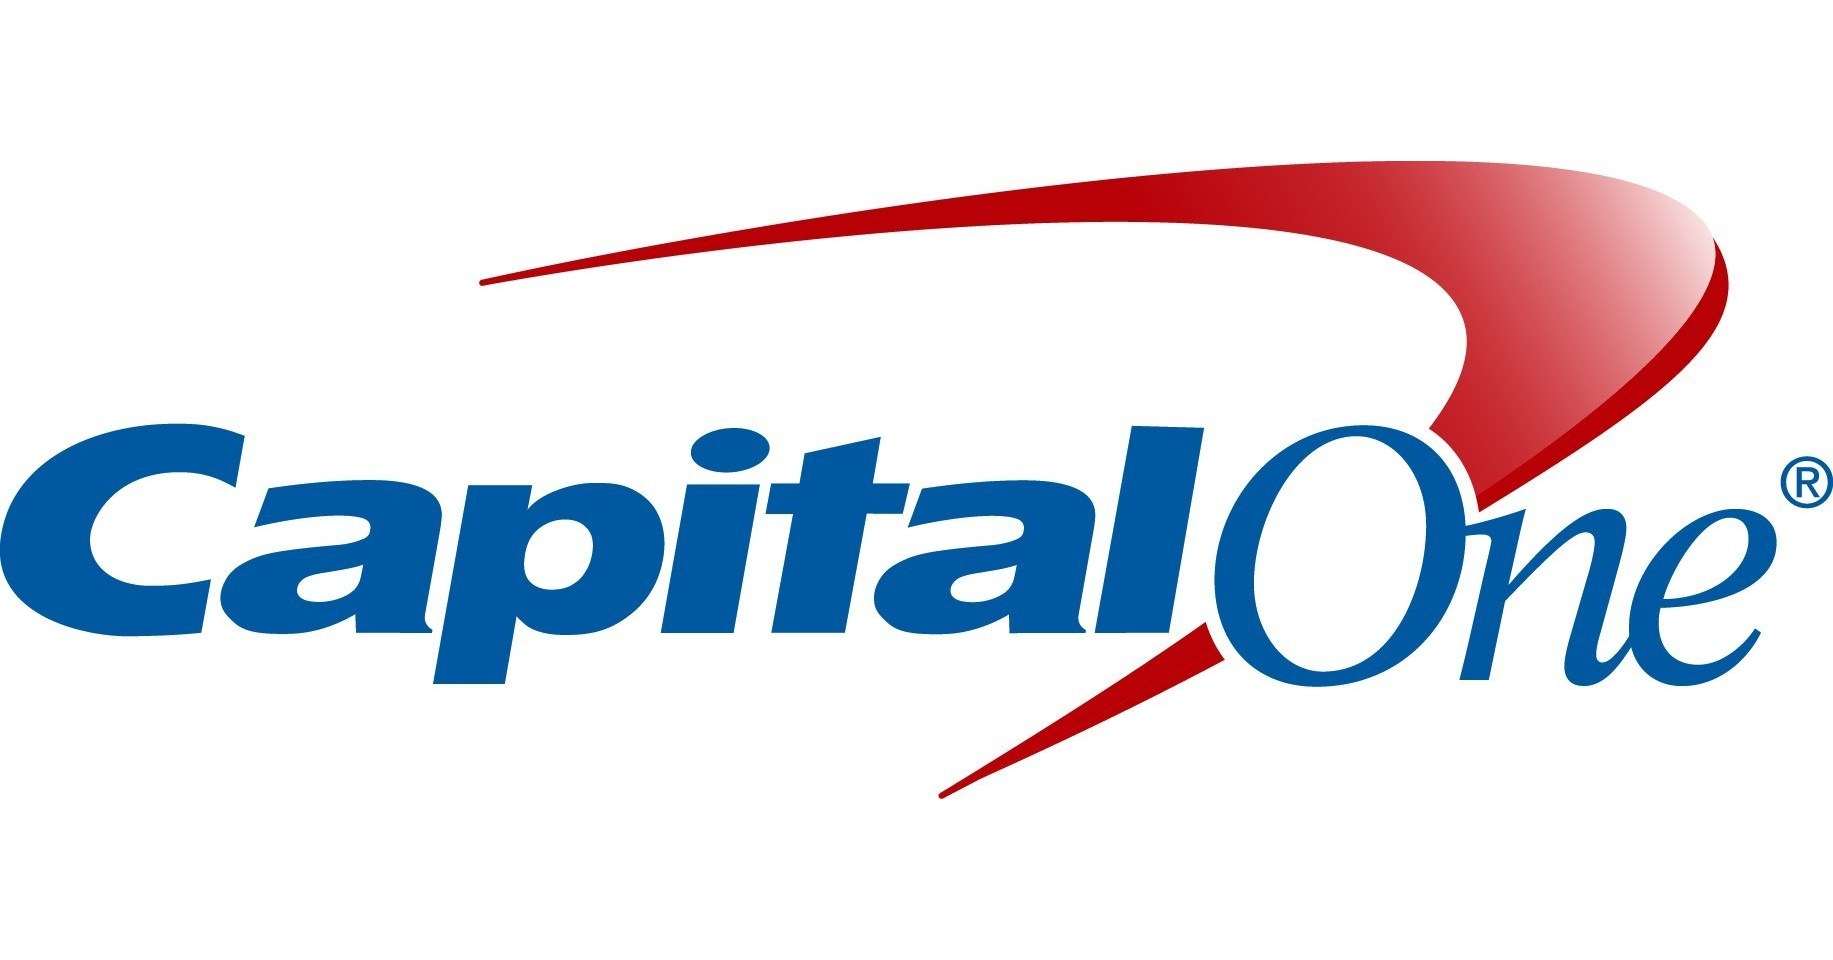 Find Out How to Apply for a Capital One Credit Card - Capital One Platinum